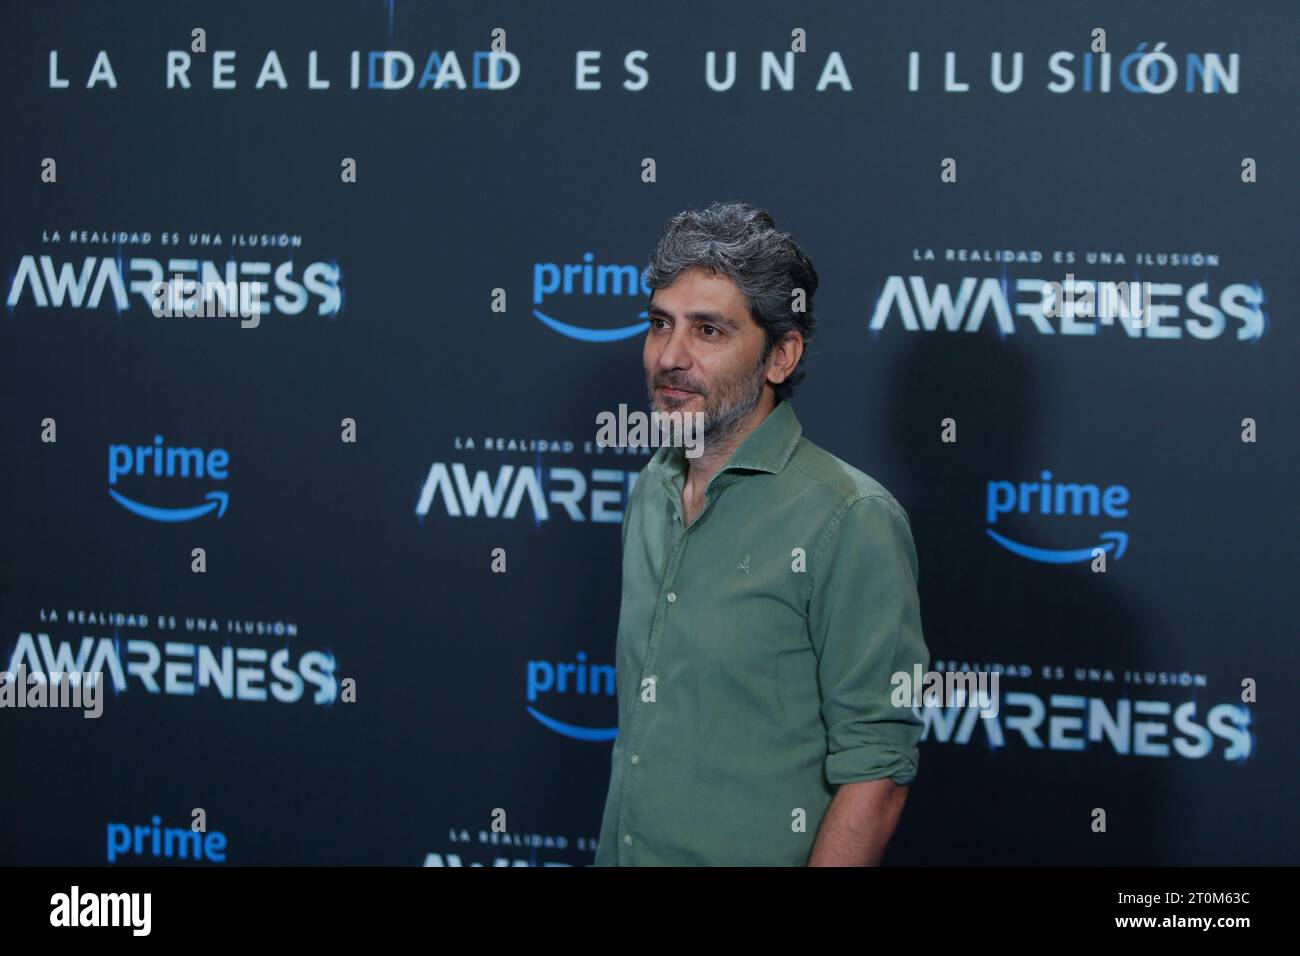 Madrid, Madrid, Spain. 5th Oct, 2023. The Spanish director and screenwriter Daniel Benmayor (Barcelona, 1978), known for his films 'Xtremo', 'Tracers' or 'Bruc' is seen on Thursday October 5, 2023, while posing for the media during the presentation of the new film 'Awareness' that will premiere on October 11 exclusively on Prime Video, in Madrid (Spain). 'Awareness' is an original Spanish action and science film with superheroic touches directed by Daniel Benmayor that tells the story of Ian, a rebellious teenager who lives with his father on the margins of society who survive on small scams Stock Photo